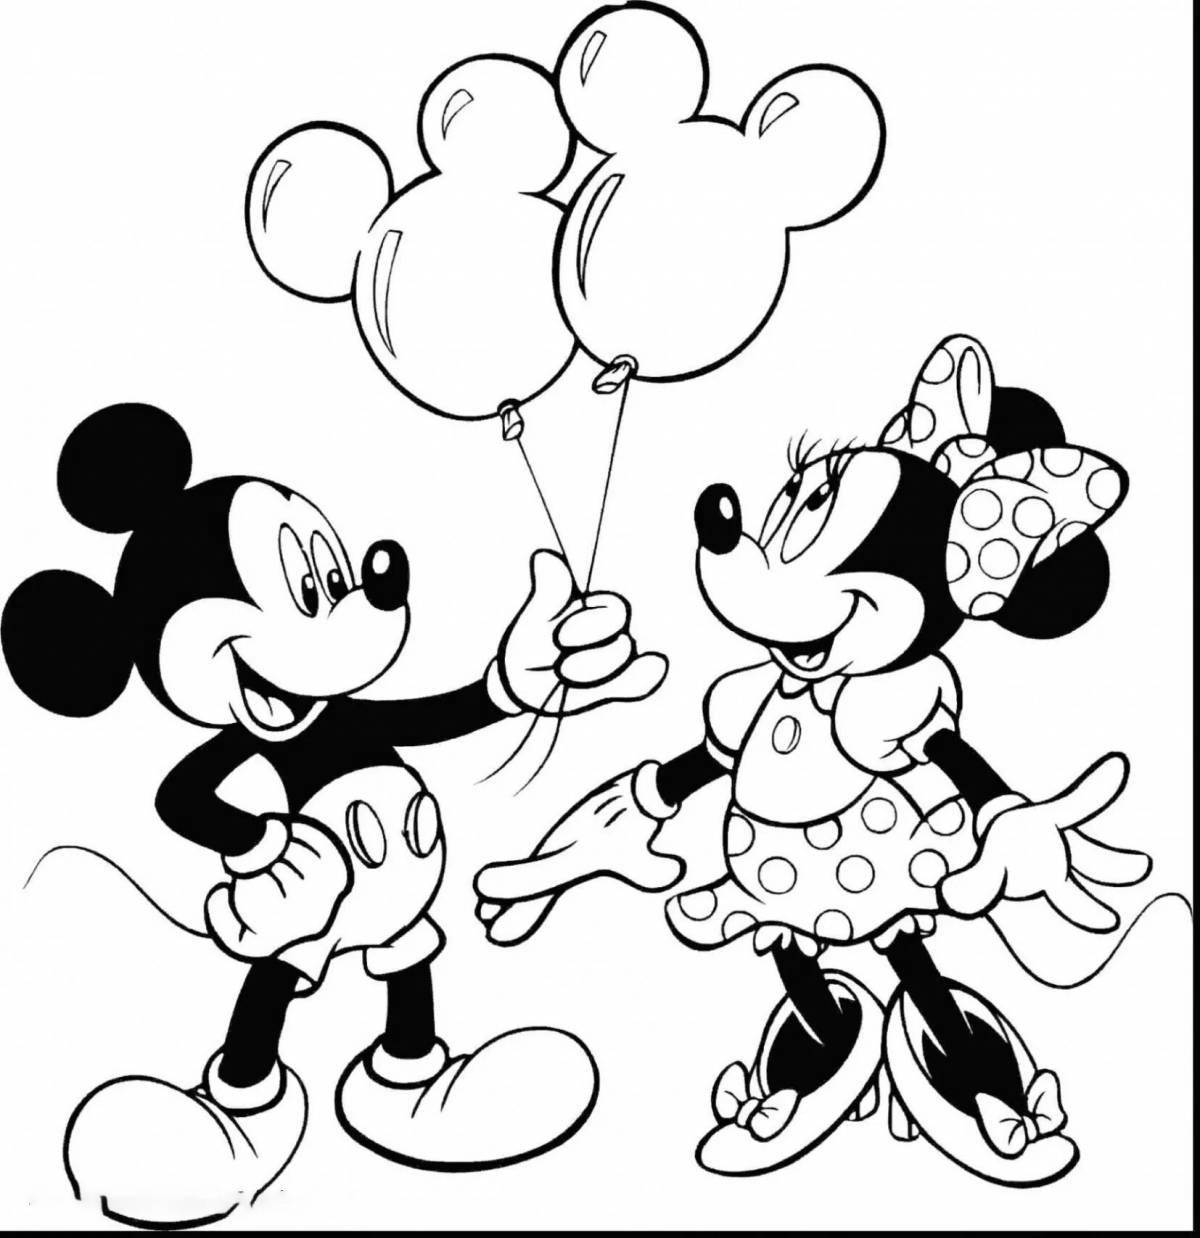 Mickey mouse #1